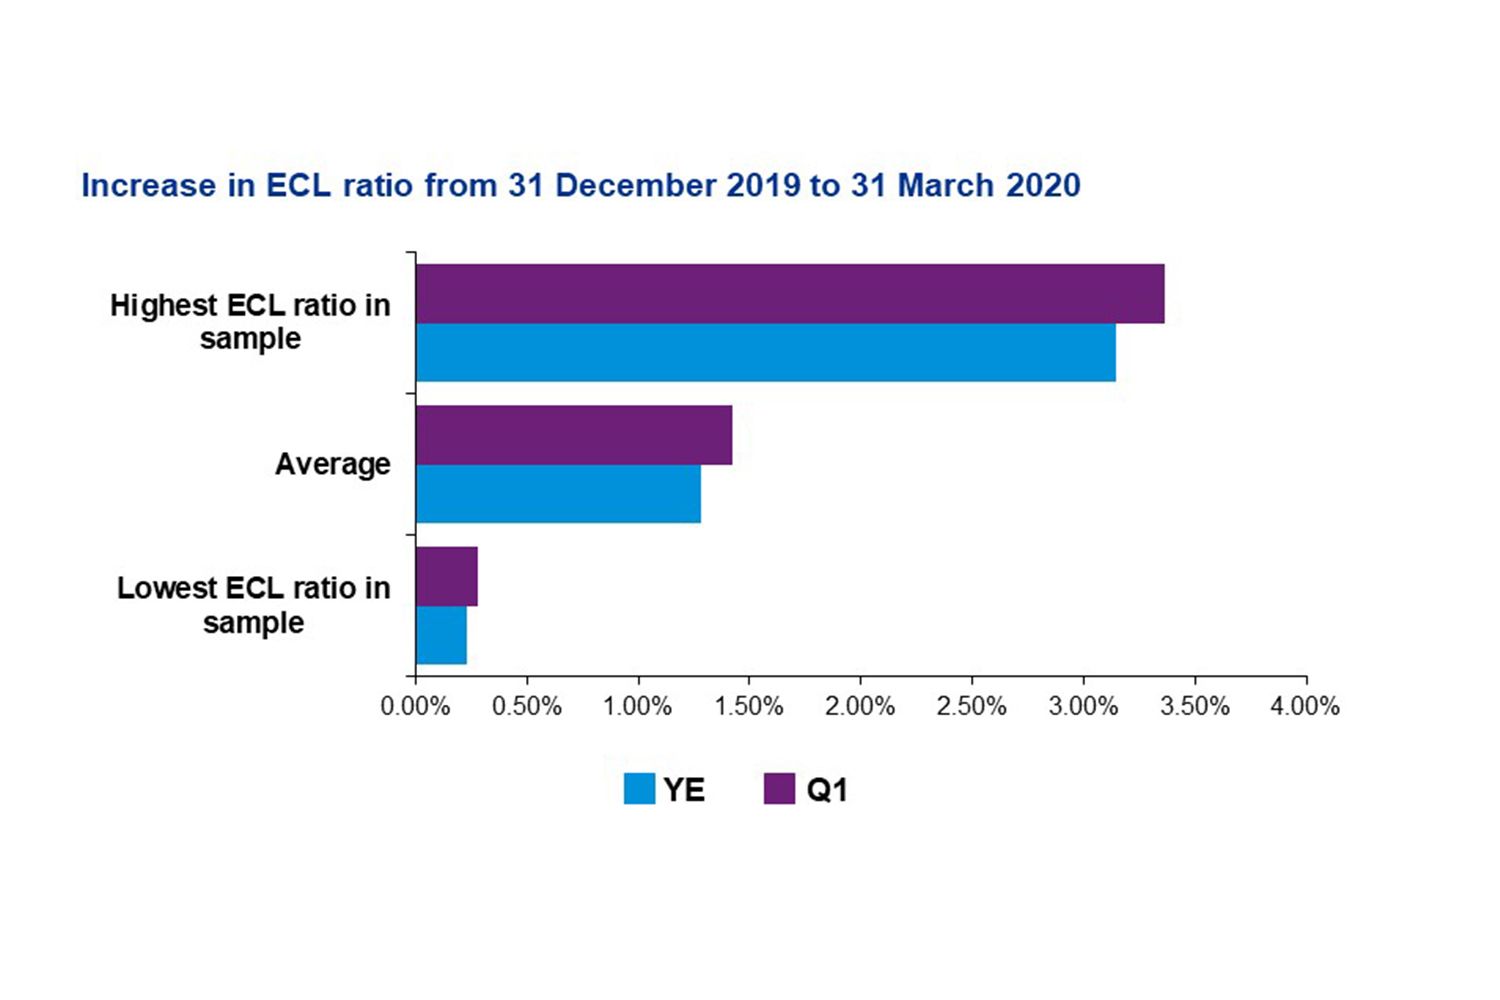 Increase in ECL ratio from 31 December 2019 to 31 March 2020